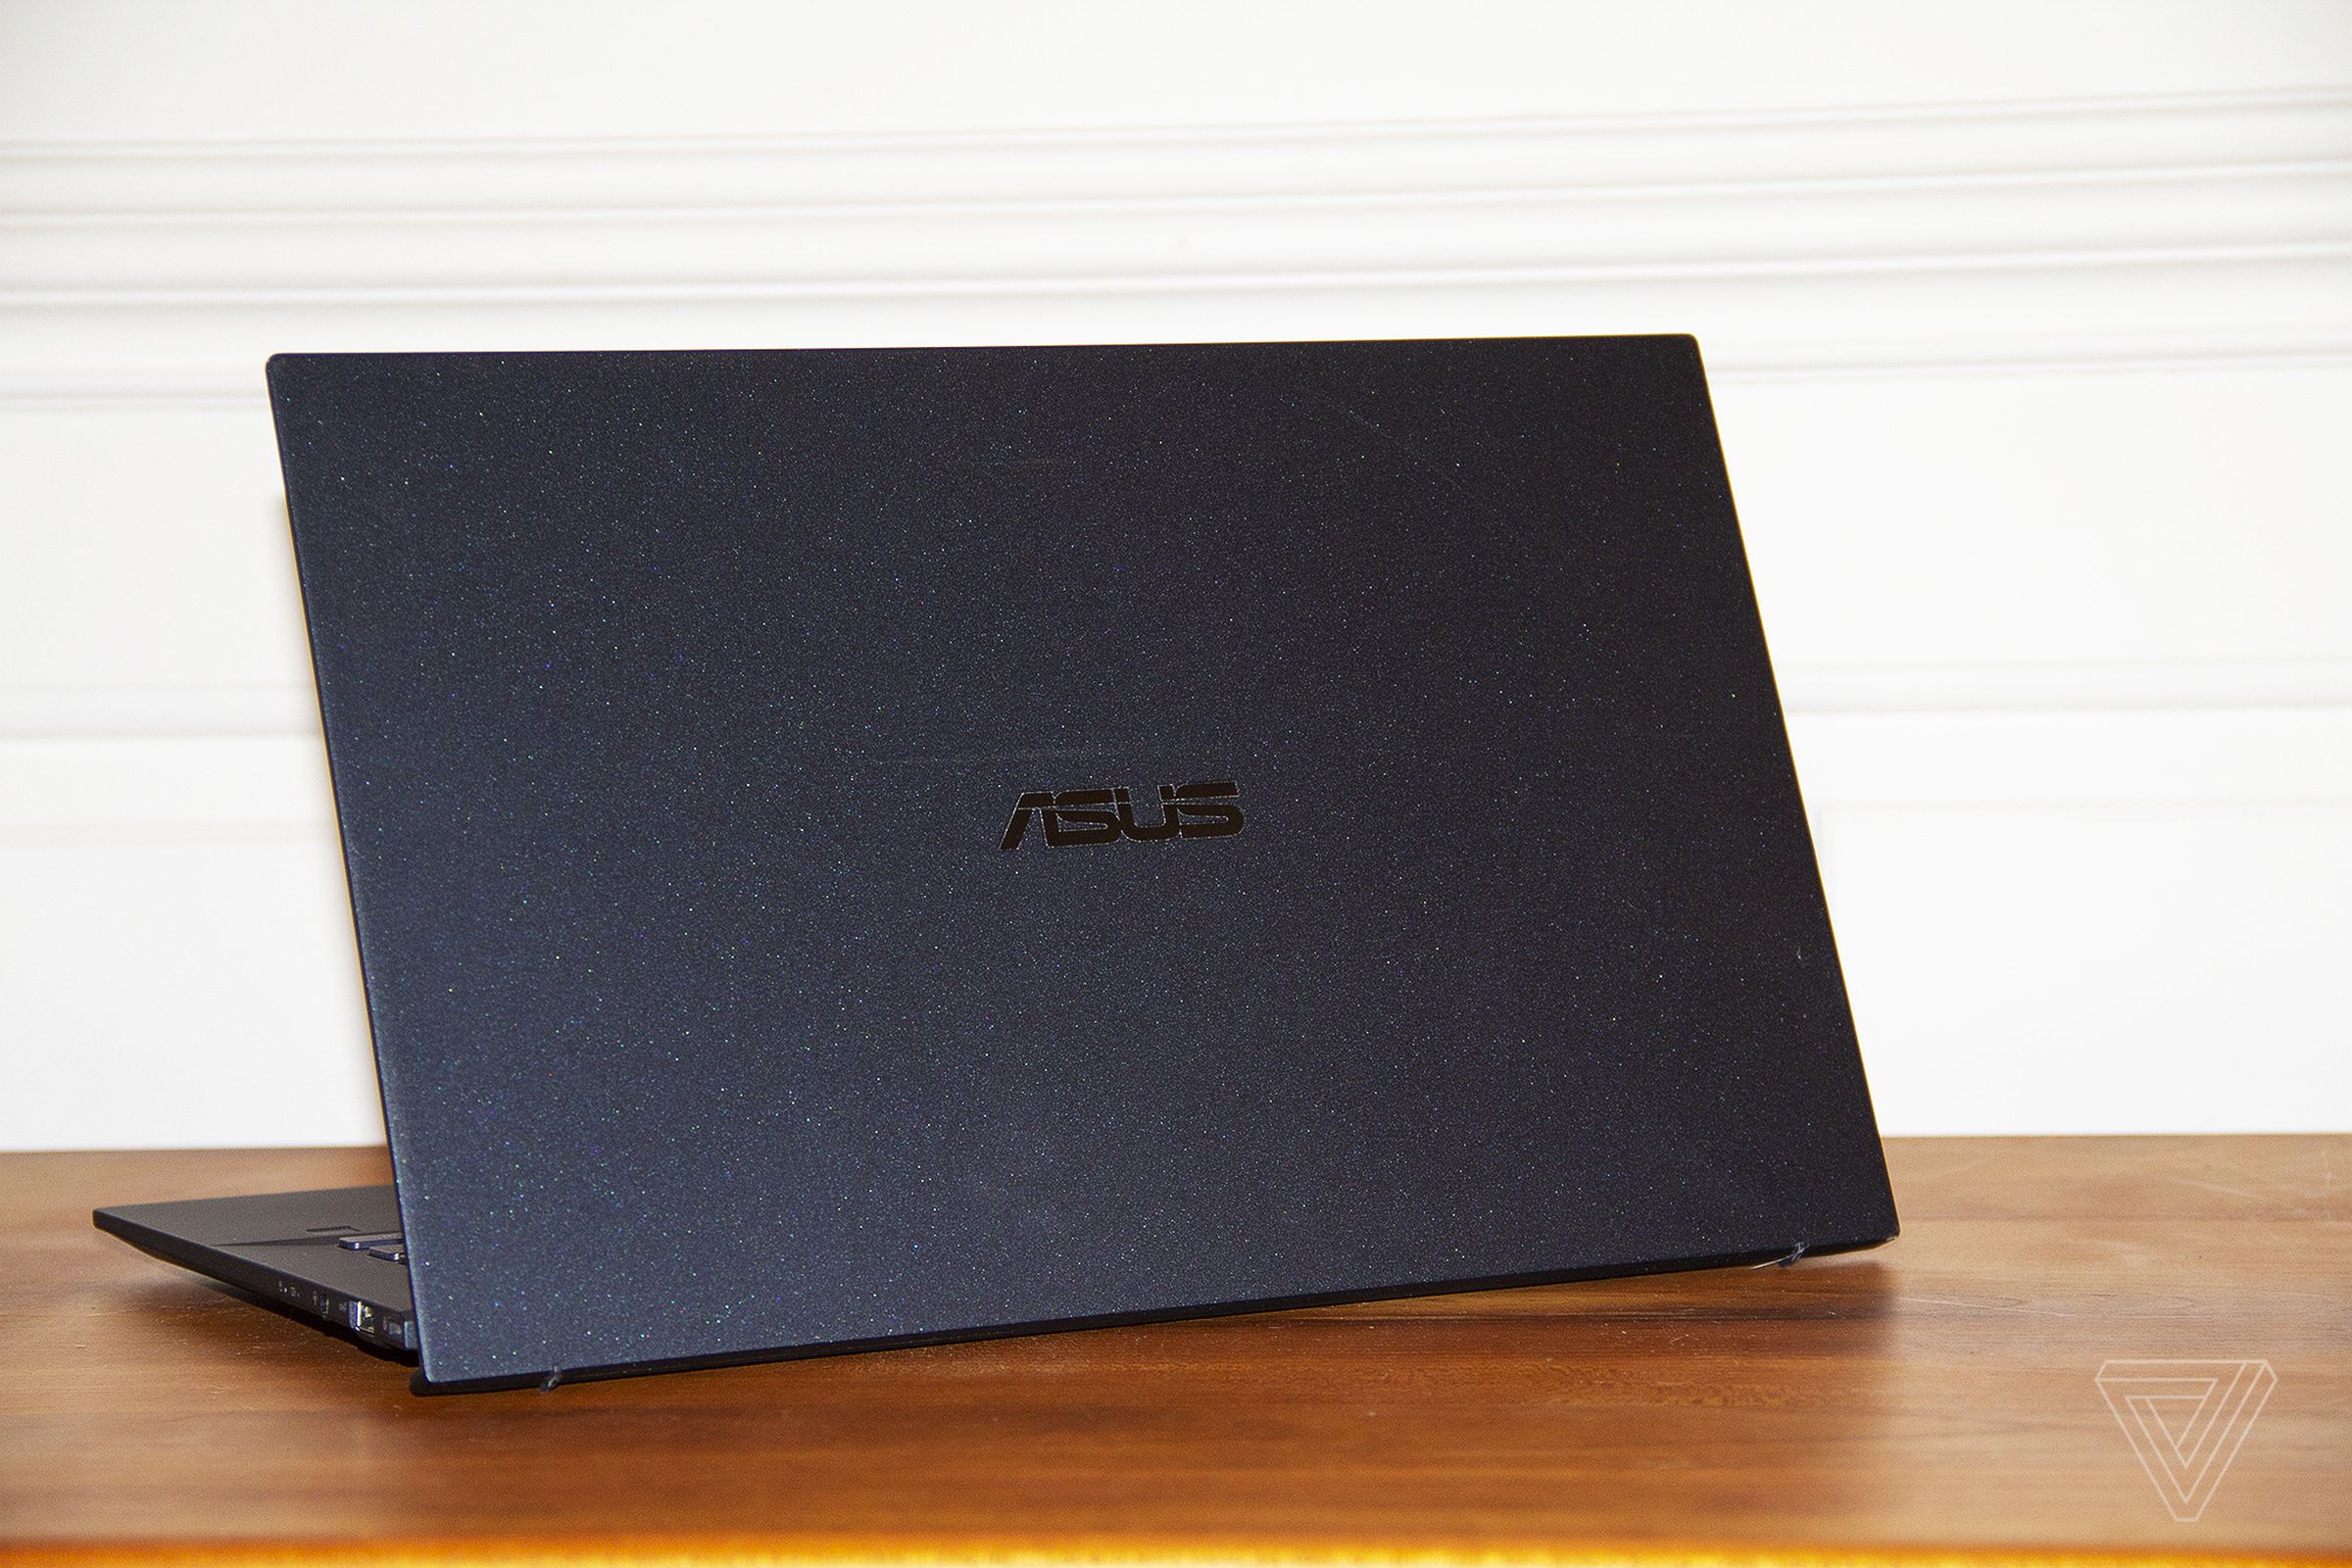 The Asus ExpertBook B9450 facing away from the canera, angled to the left.